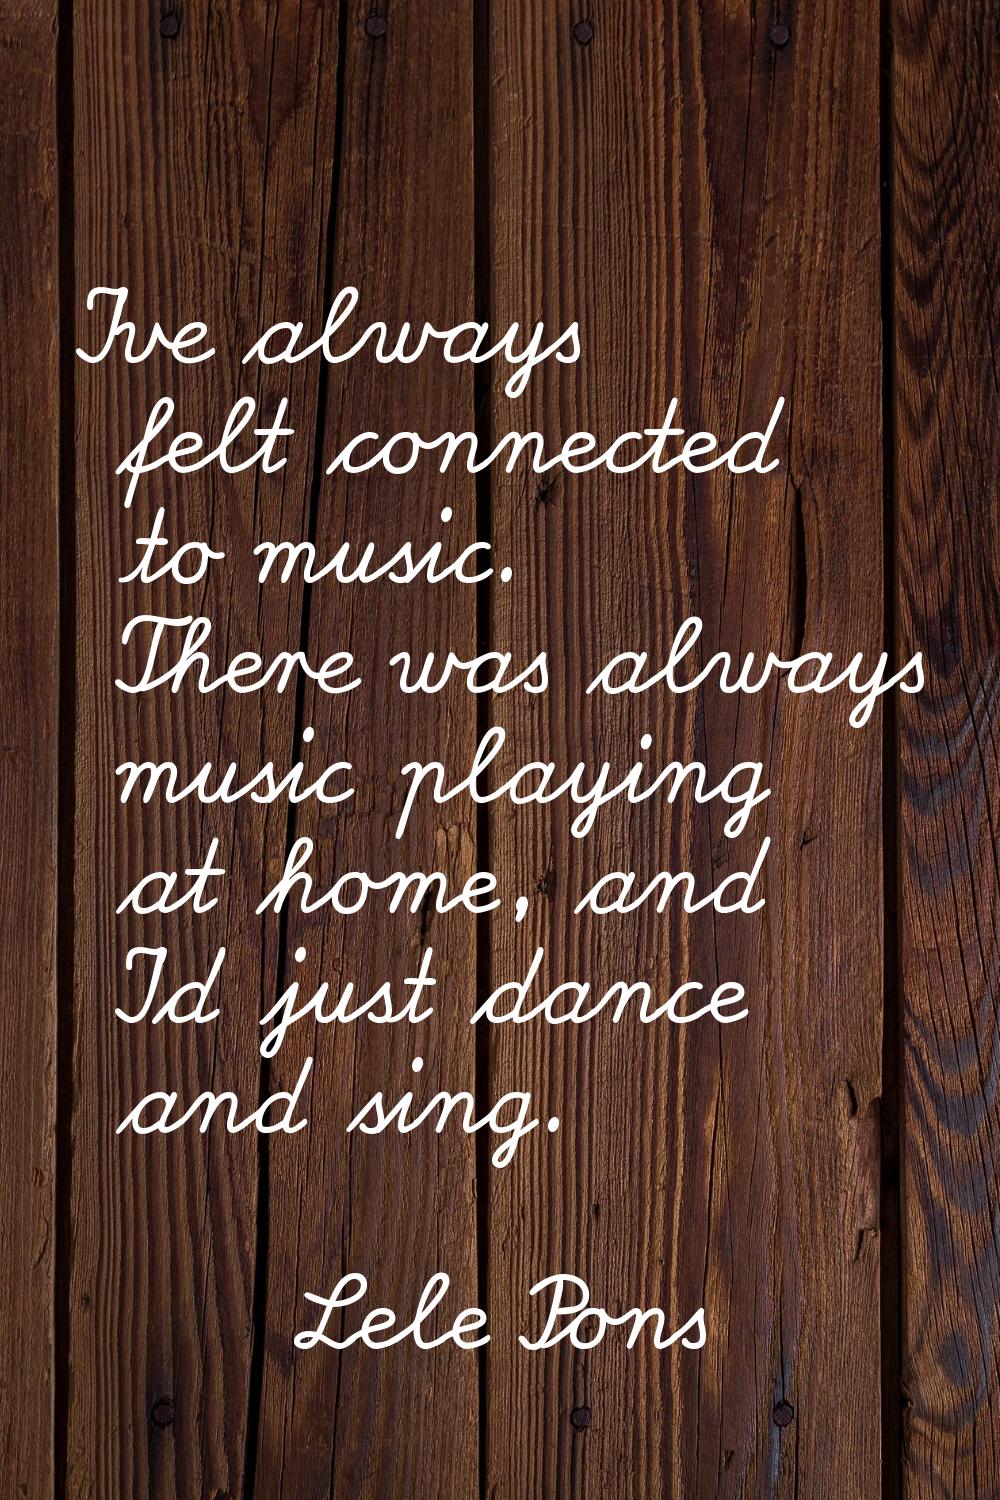 I've always felt connected to music. There was always music playing at home, and I'd just dance and